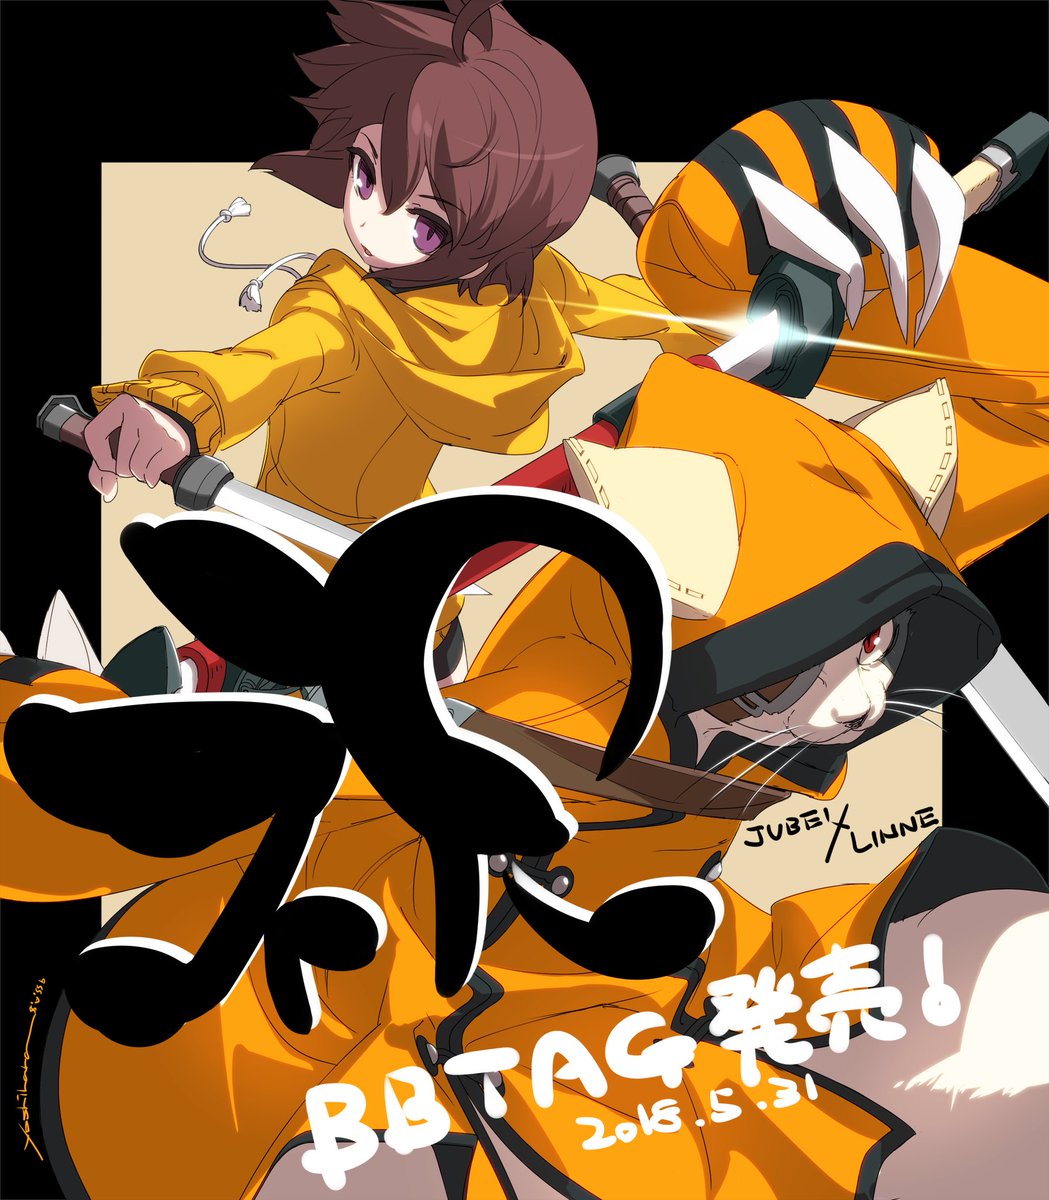 With BBTAG bringing in talent from Atlus and French Bread, a number of guest artists contributed to the game in collaboration with ASW staff.

Under Night's lead character artist, Seiichi Yoshihara, illustrated Linne teamed up with Jubei in celebration of its 1.0 release in 2018.